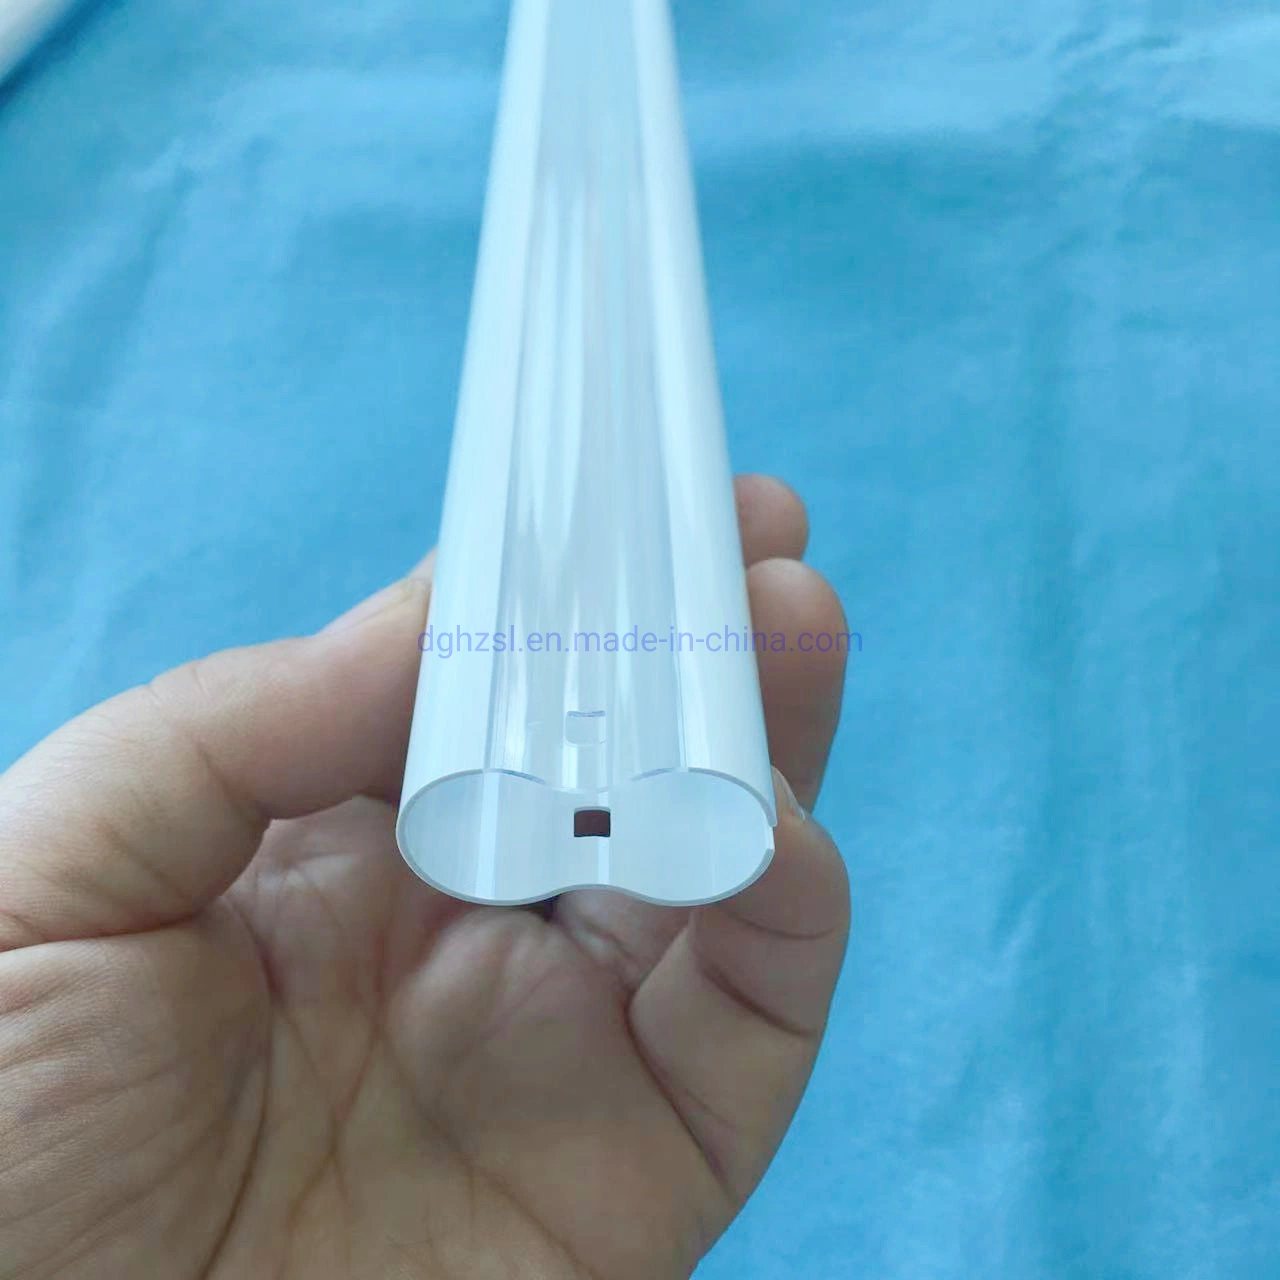 "8" Shape High quality/High cost performance  Transparent Clear Polycarbonate Pipe Colorful PC PMMA Acrylic Plastic Tube